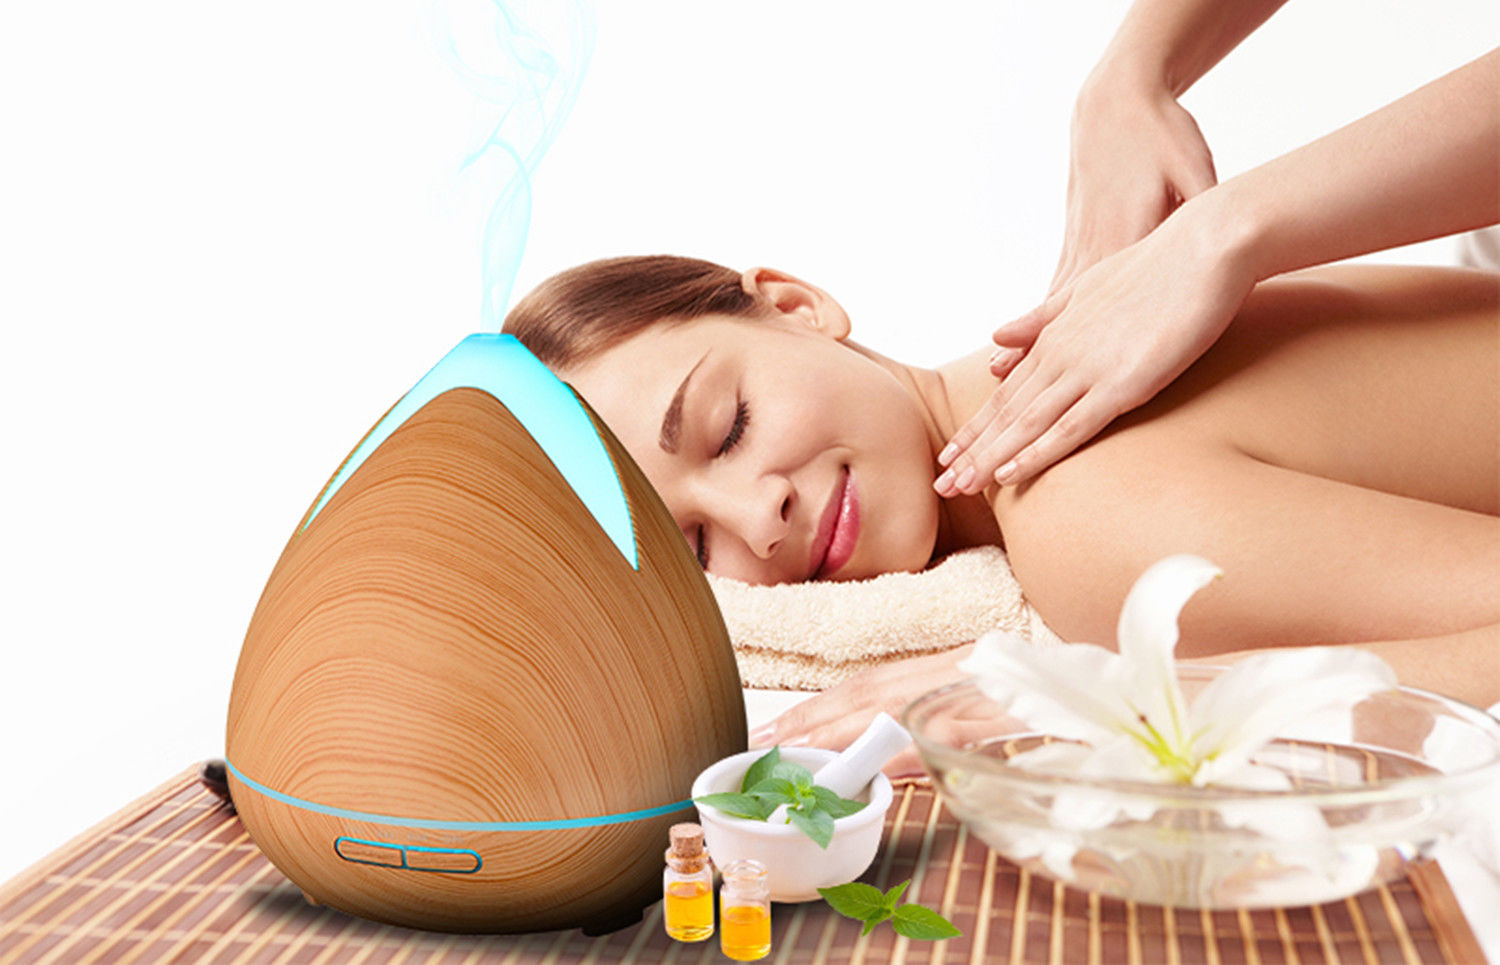 Essential Oils Ultrasonic Aromatherapy Diffuser Air Humidifier Purify 400ML - Light Wood-Aroma Diffusers &amp; Humidifiers-PEROZ Accessories